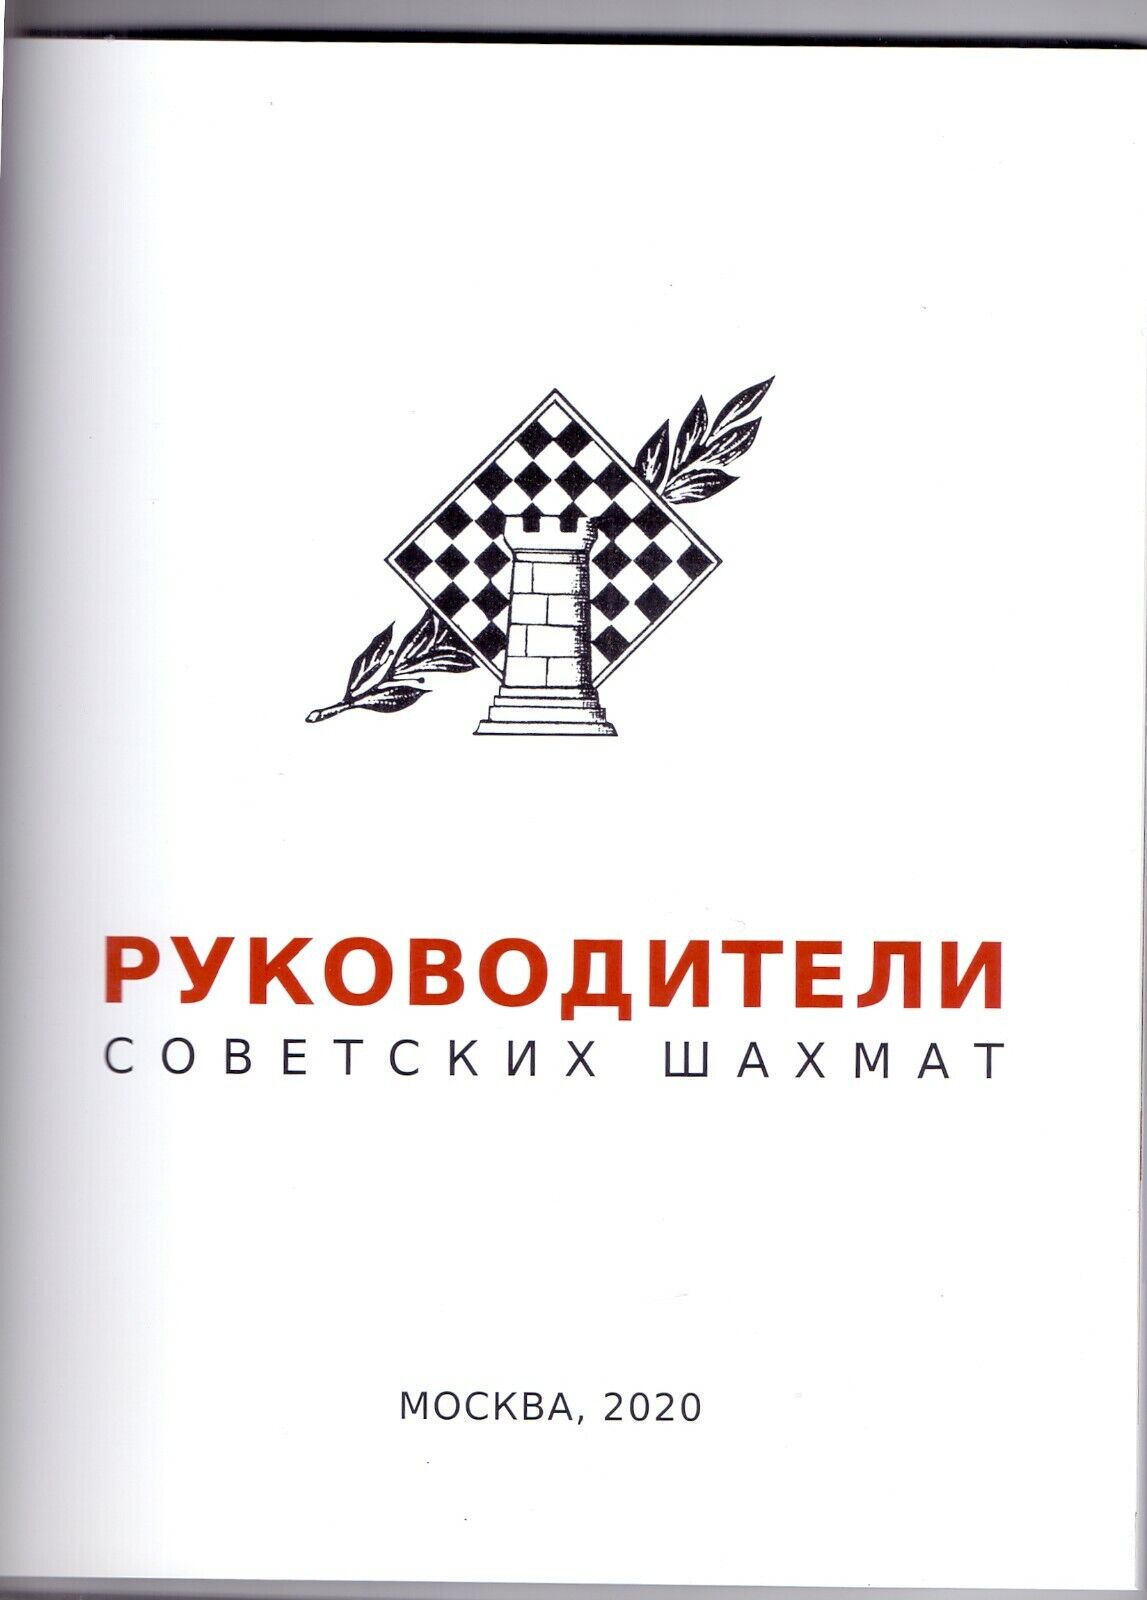 11486.Russian Chess Book. D. Oleynikov. The leaders of the Soviet chess. 2020